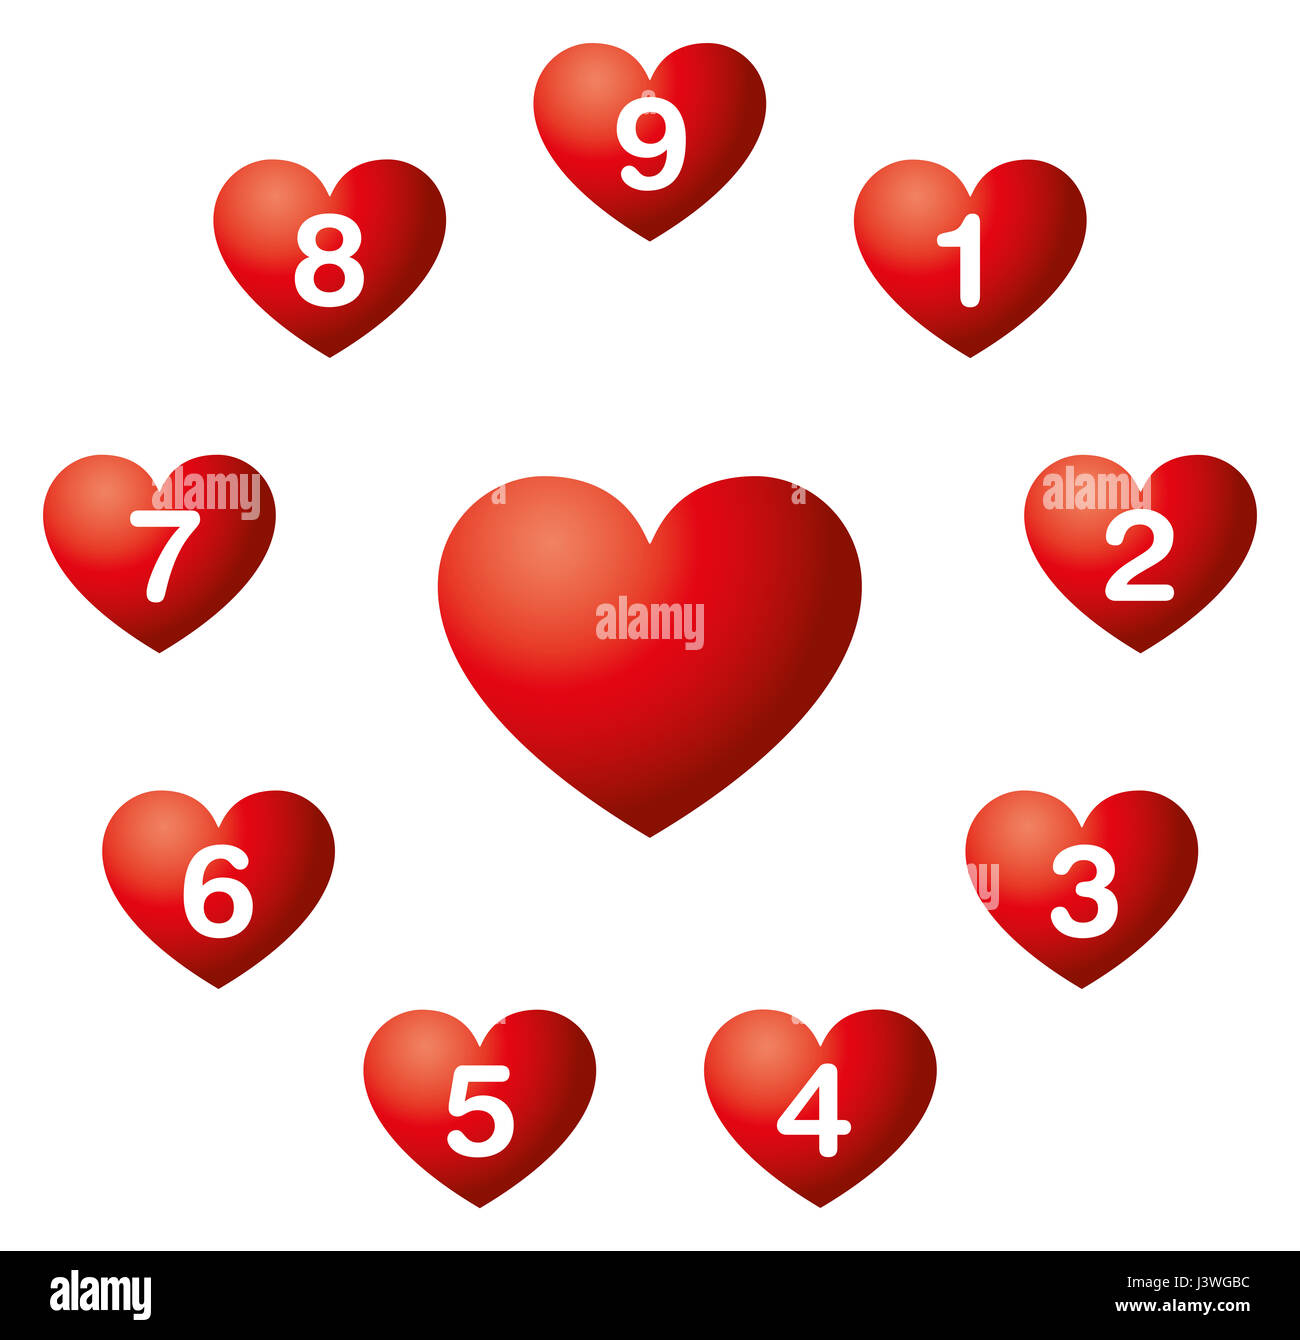 Heart numbers in a circle. Numerology. Nine soul urge numbers in red hearts around a heart symbol. The numbers reveal what we want more, what us drive Stock Photo